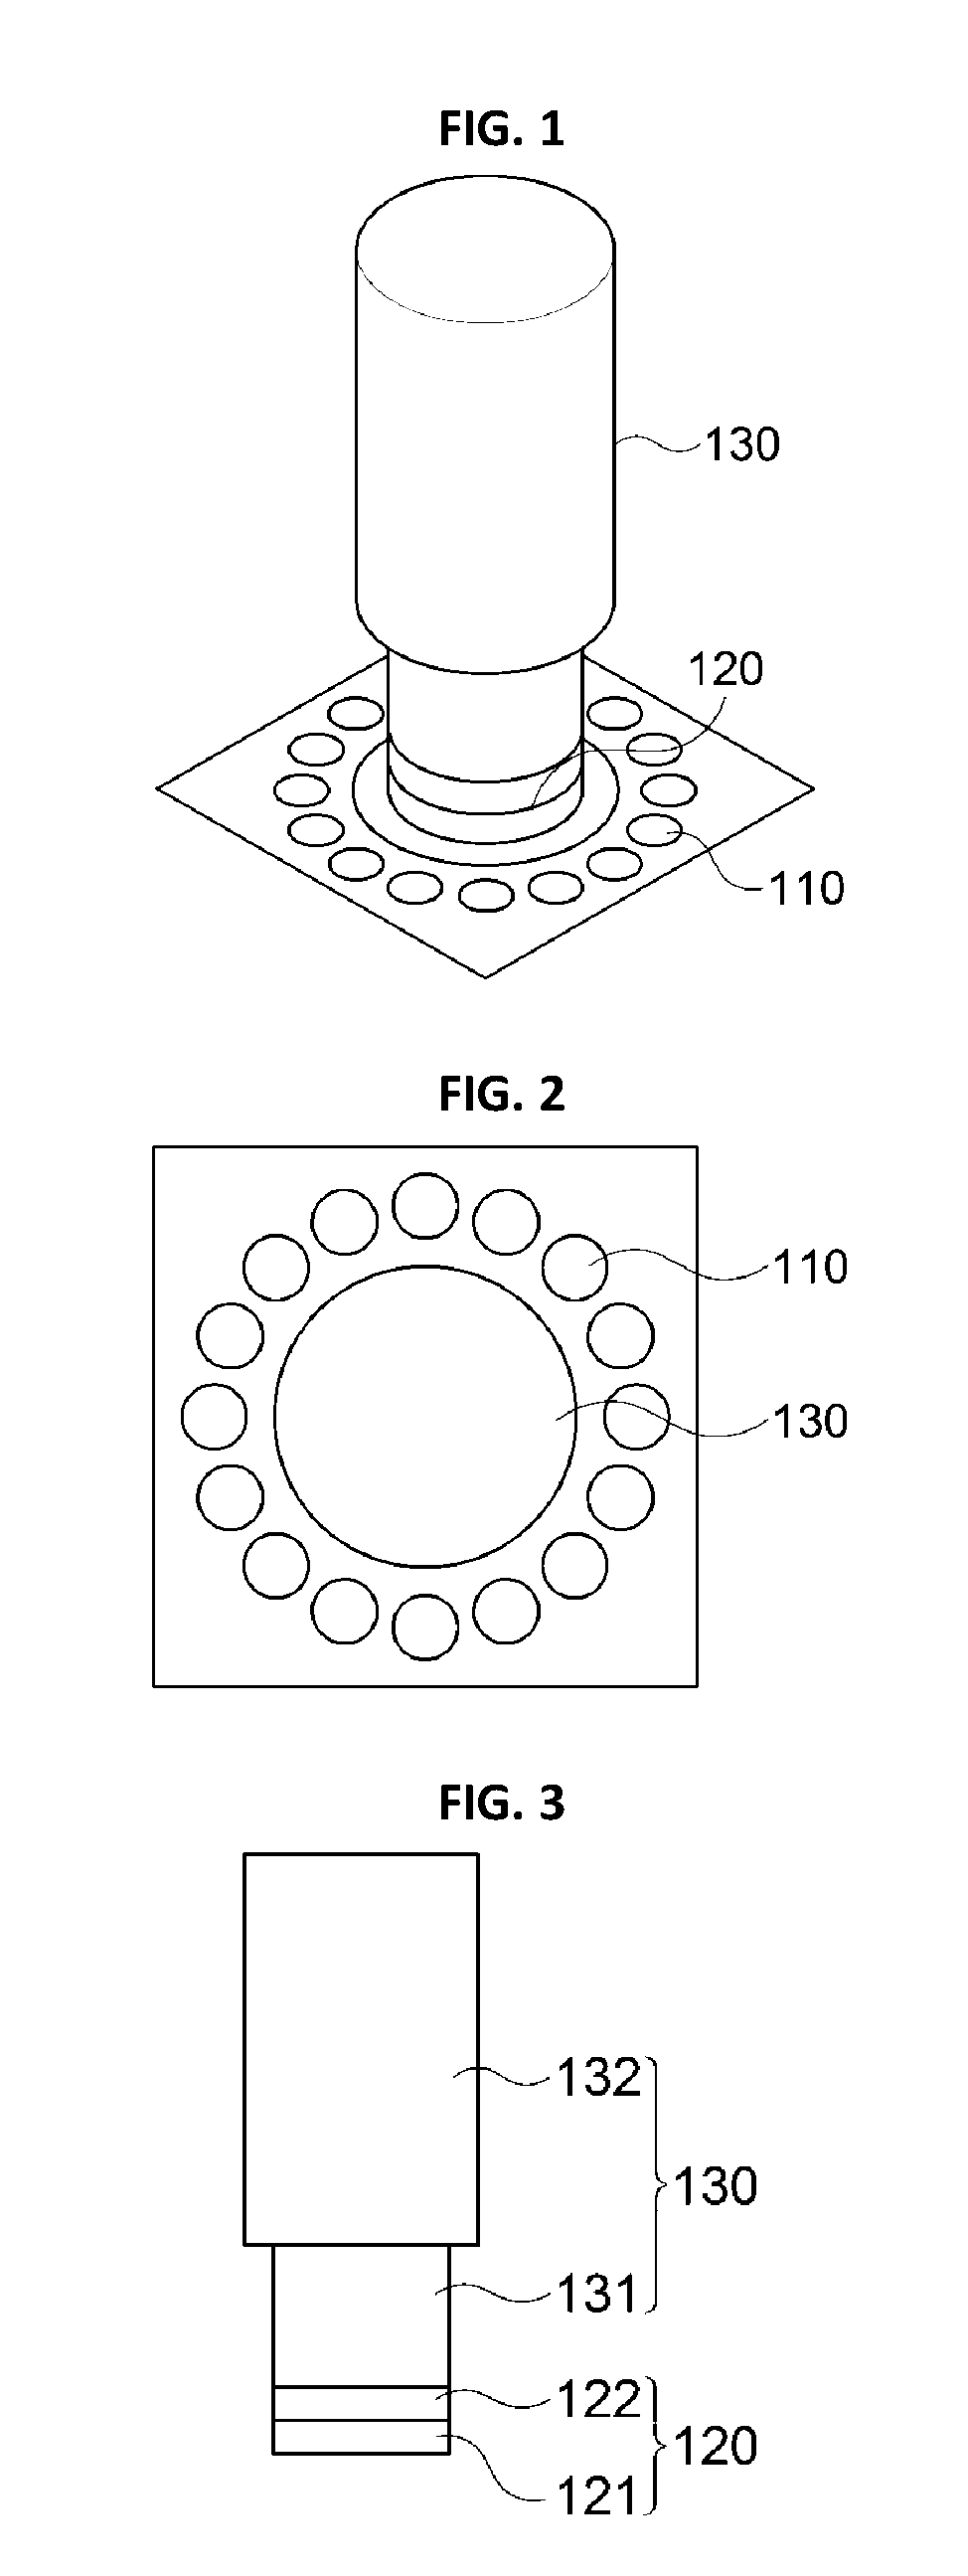 Fluorescent imaging device for plaque monitoring and multi-imaging system using same